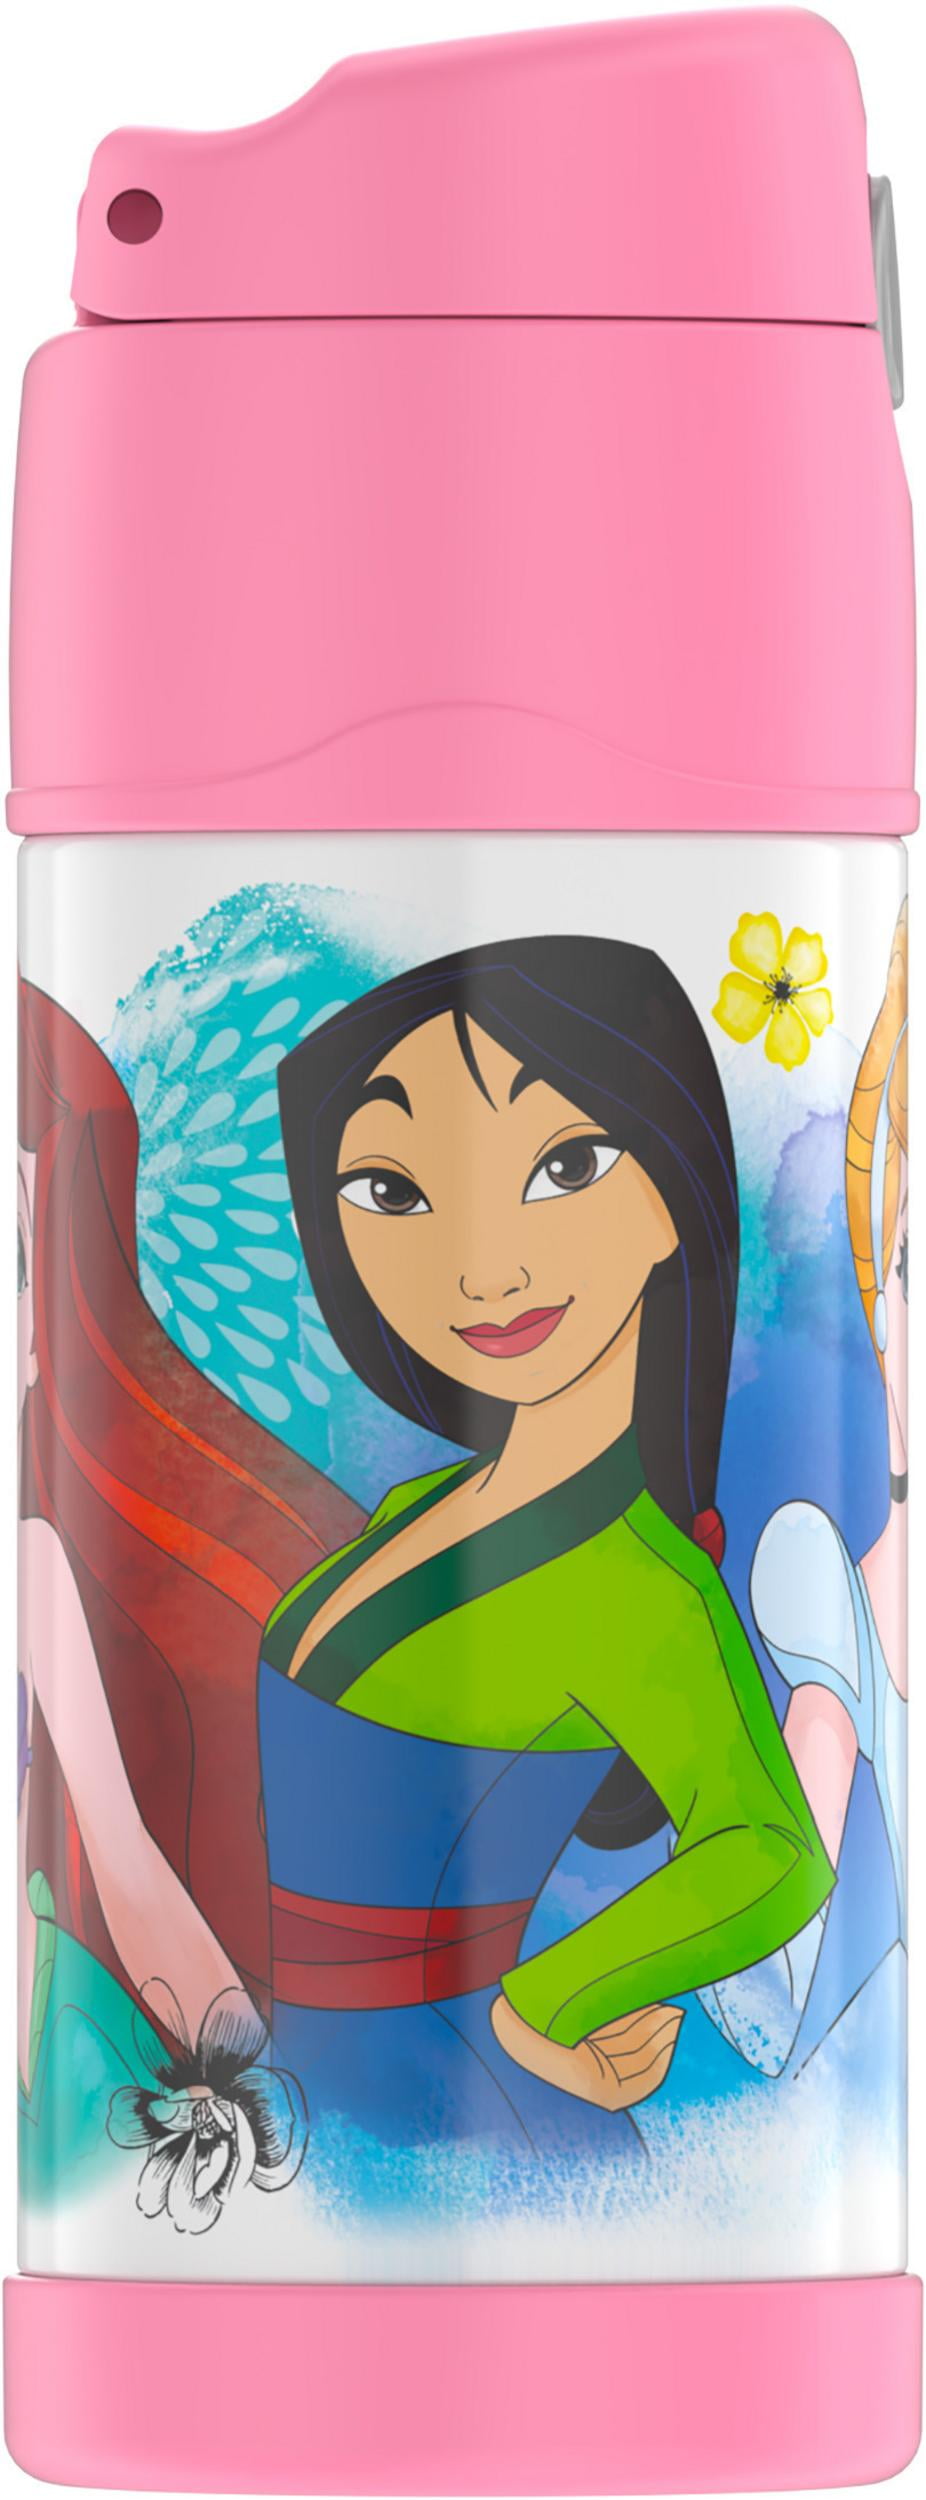 Thermos FUNtainer Disney Princess Bottle With Straw, Purple, 12 Ounces -  Bed Bath & Beyond - 20955047